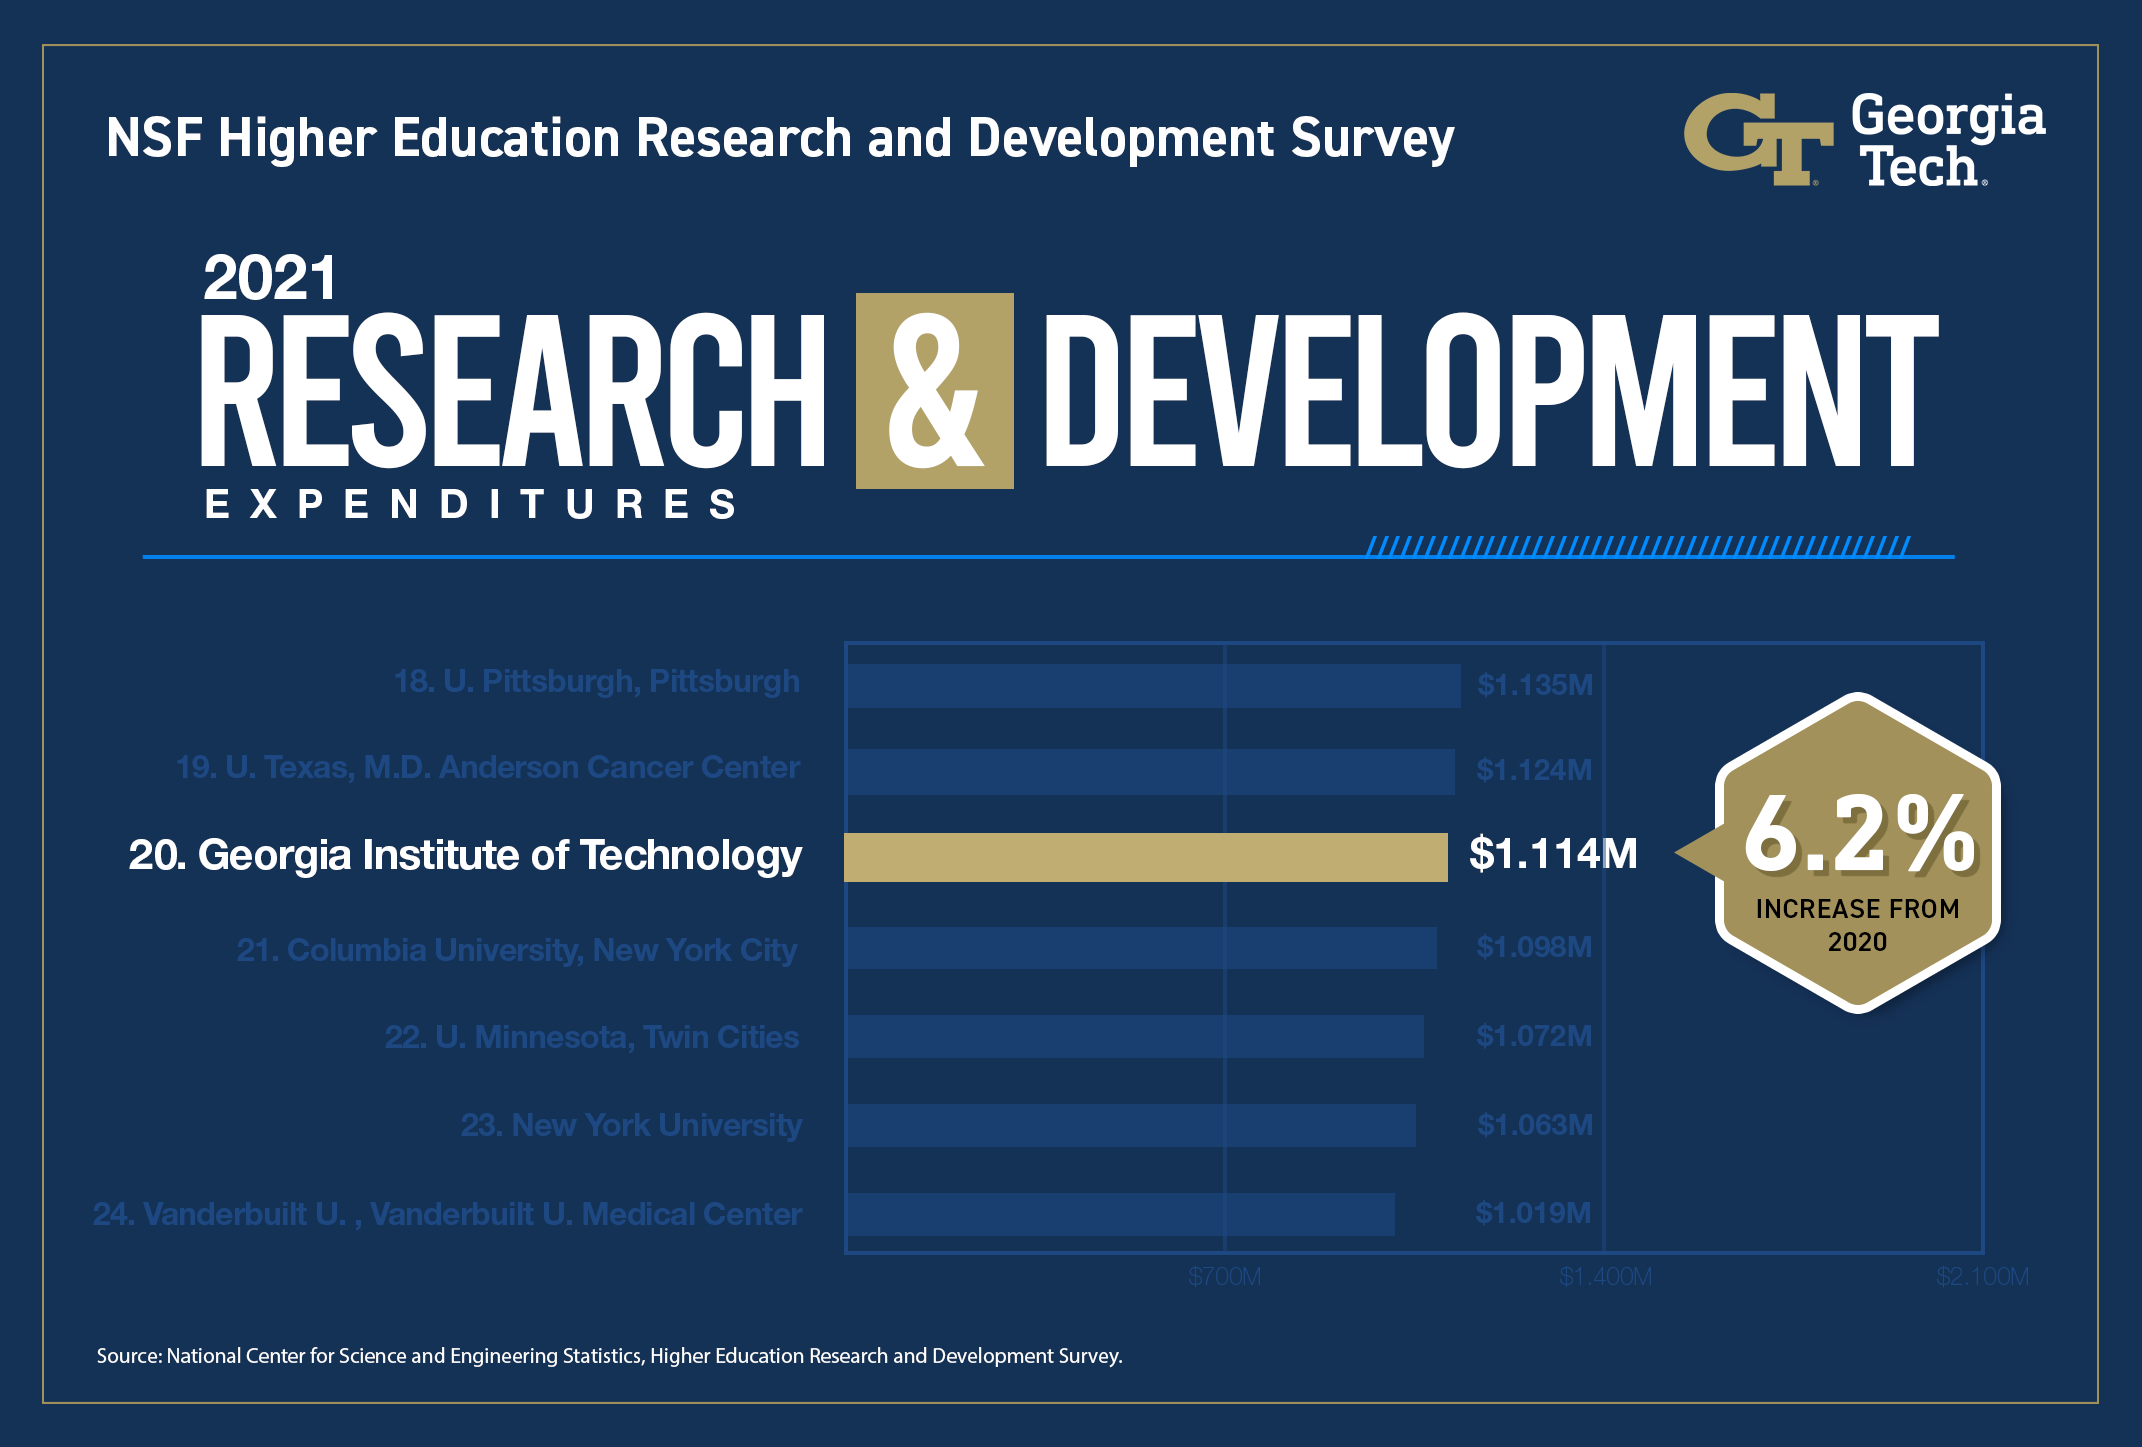 Georgia Tech is ranked No. 20 on the list of schools with the highest research and development expenditures in the United States. (Graphic: Raul Perez)